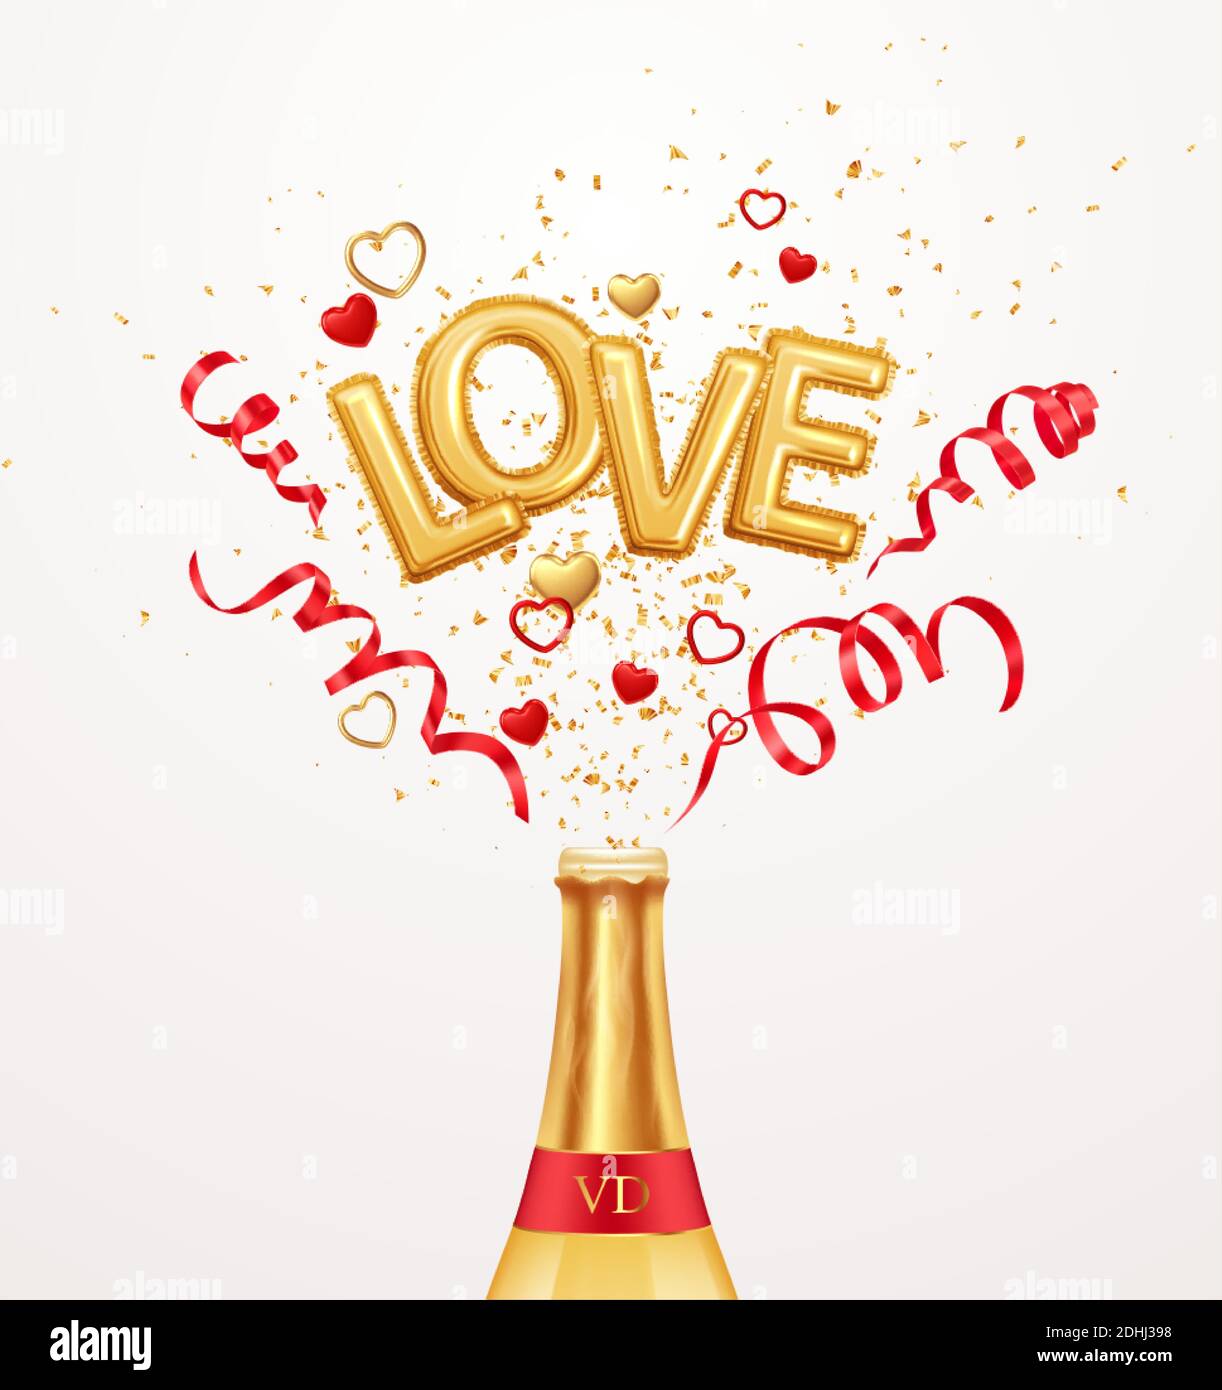 Inscription love helium balloons on a background of golden confetti and red swirling streamer ribbons flying out of a bottle of champagne. Happy Stock Vector